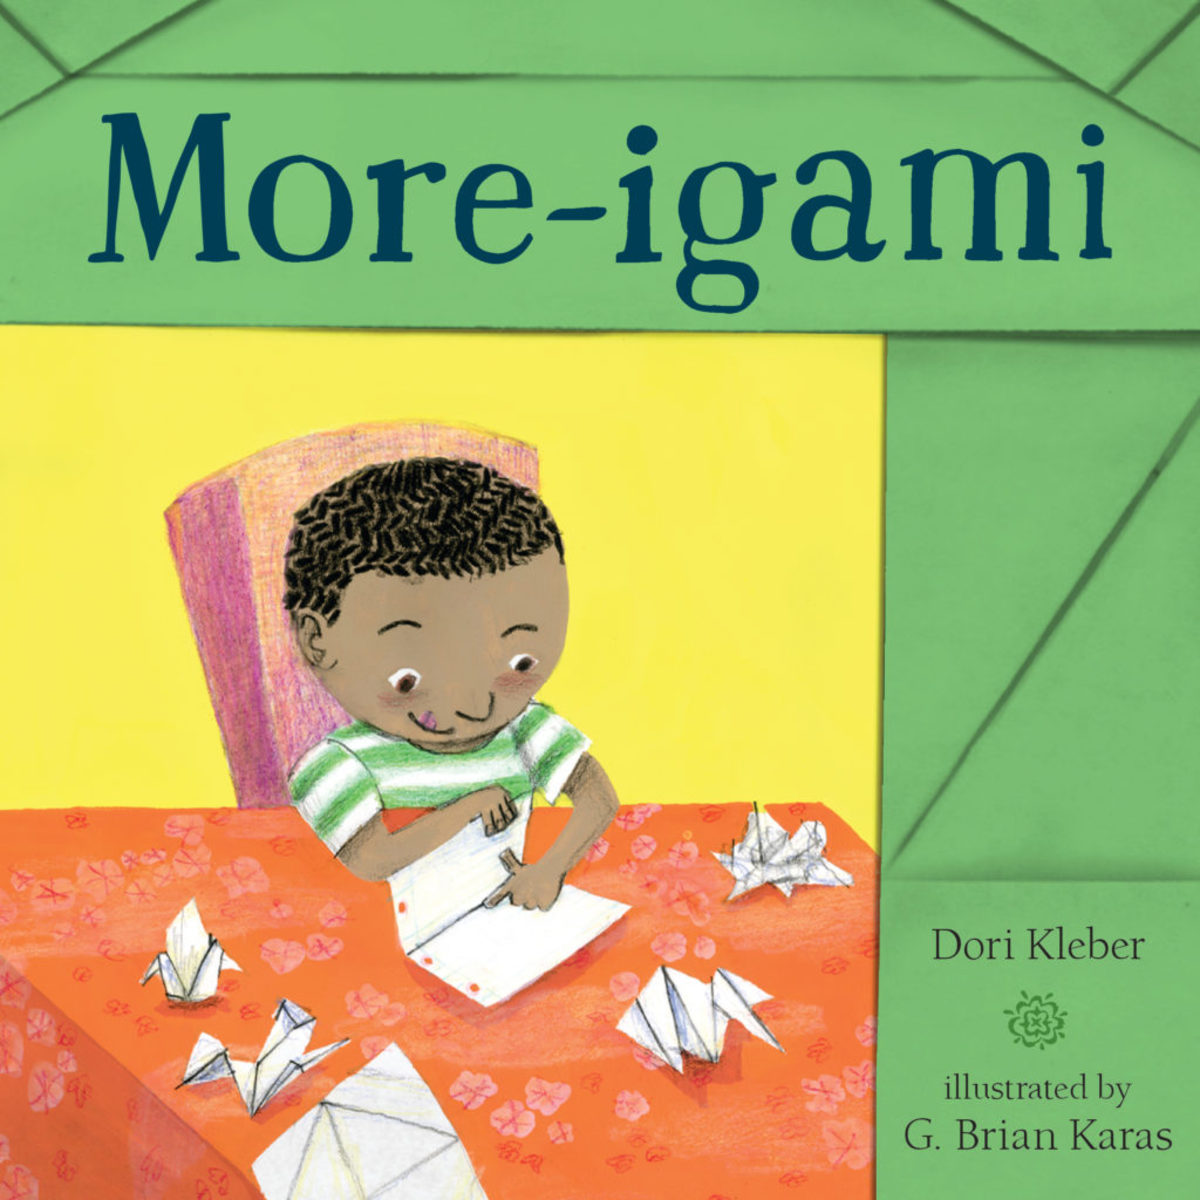 MORE-IGAMI. Text copyright © 2016 by Dori Kleber. Illustrations copyright © 2015 by G. Brian Karas. Reproduced by permission of the publisher, Candlewick Press, Somerville, MA.